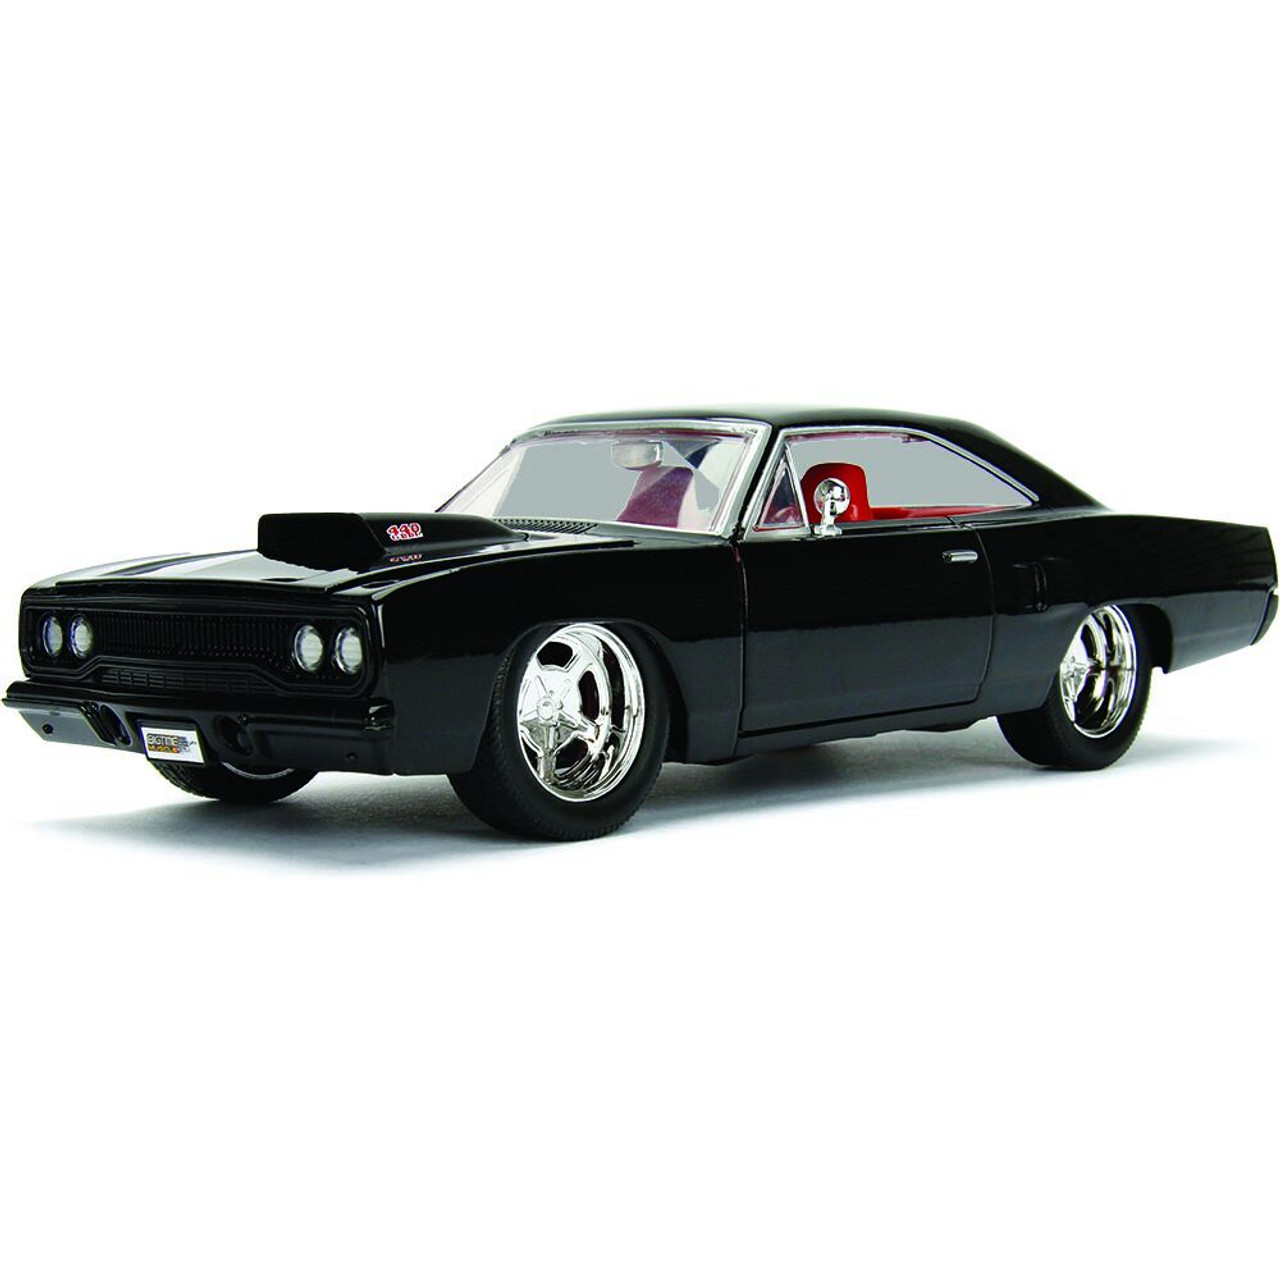 1970 Plymouth Road Runner 1:24 Scale Diecast Model Car by Jada Toys